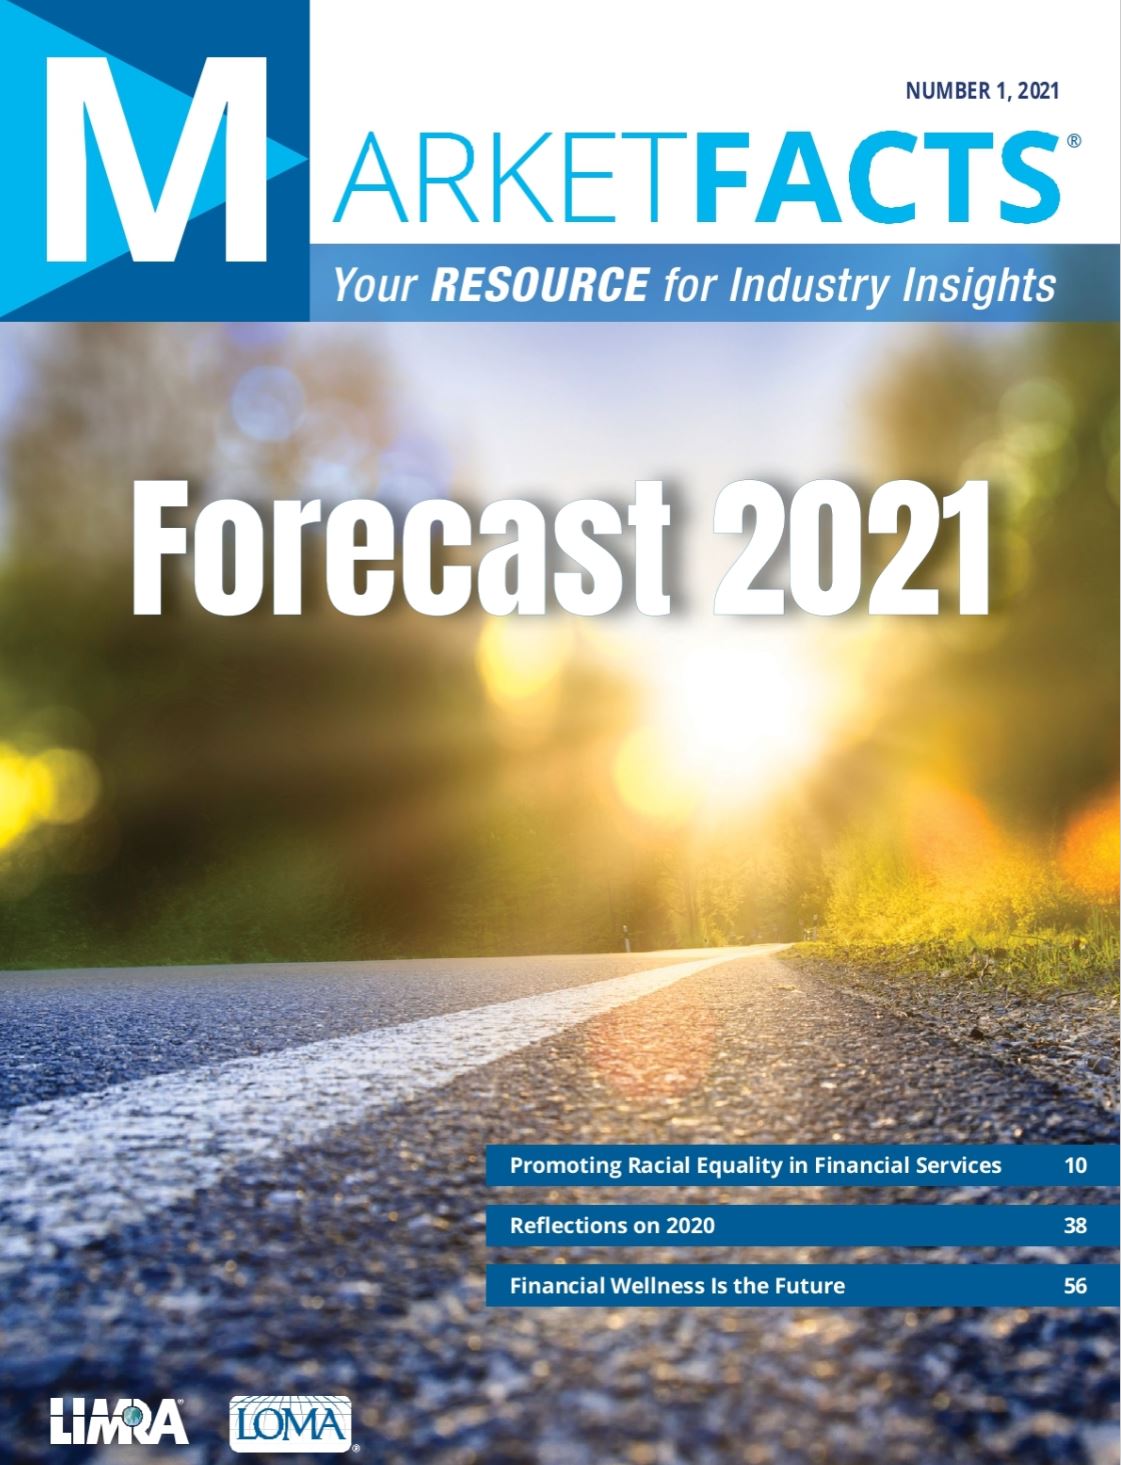 MarketFacts-Cover-2021.JPG